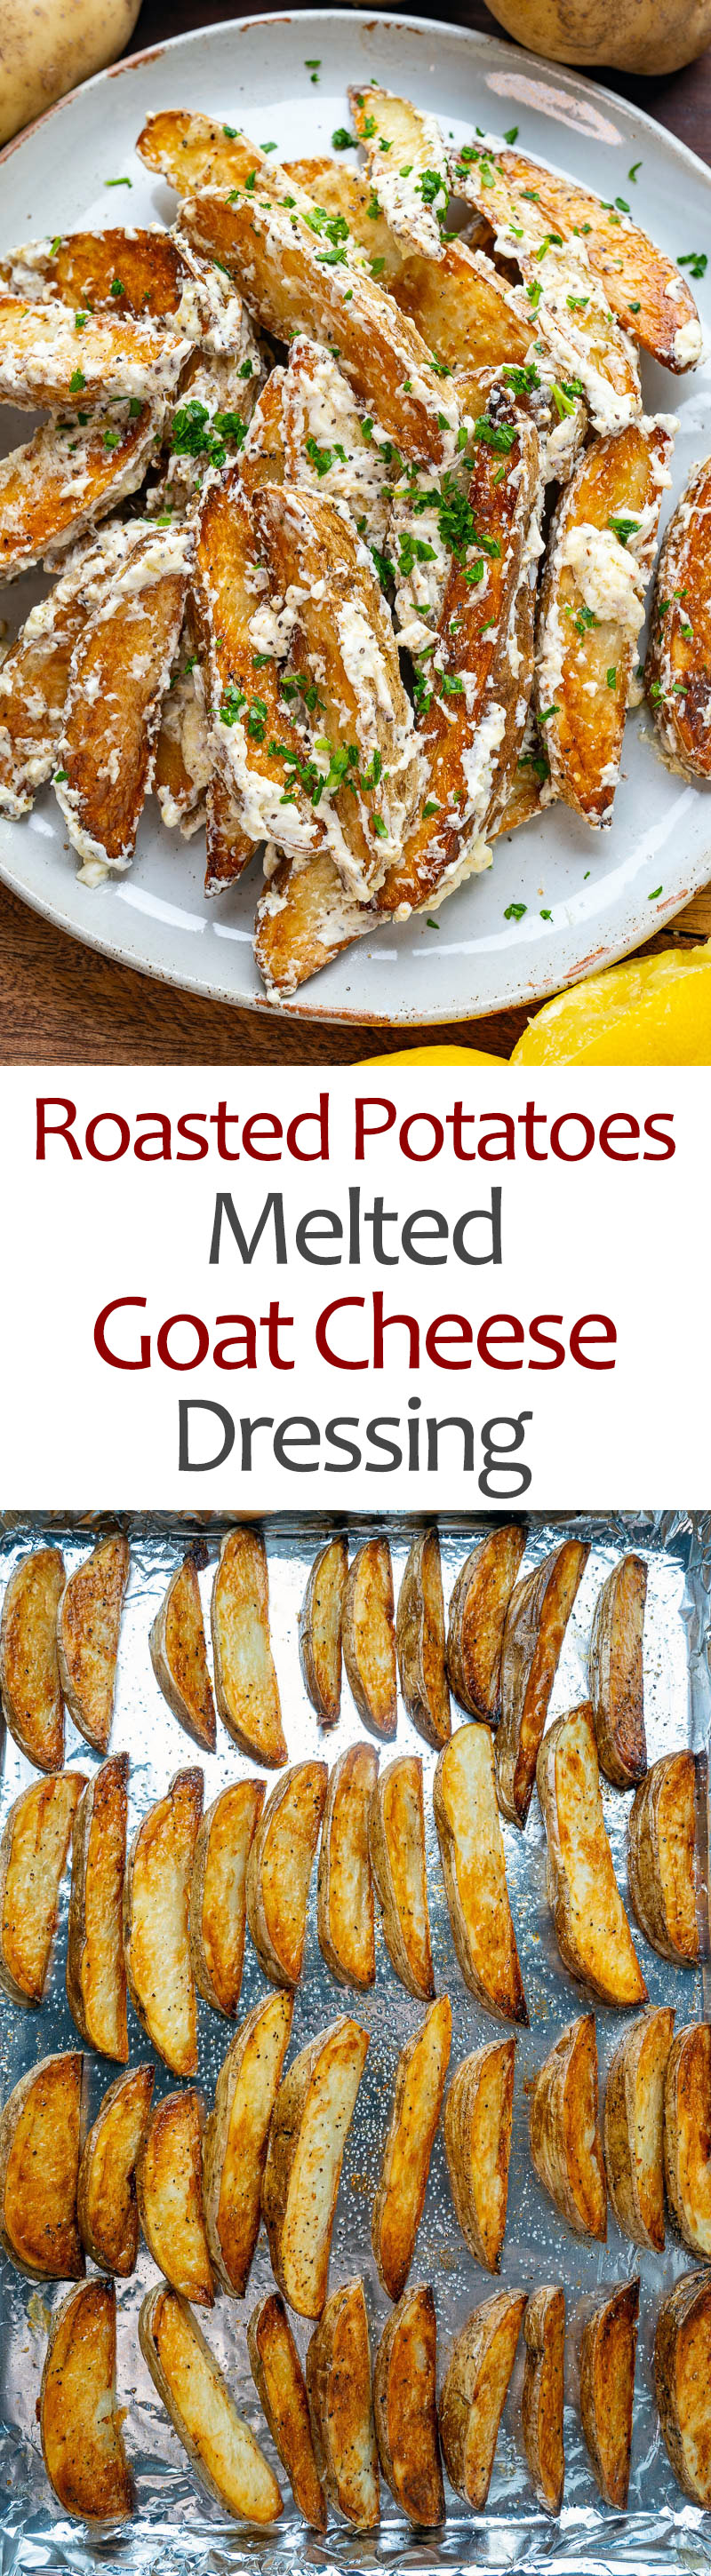 Roasted Potatoes in a Melted Goat Cheese Dressing